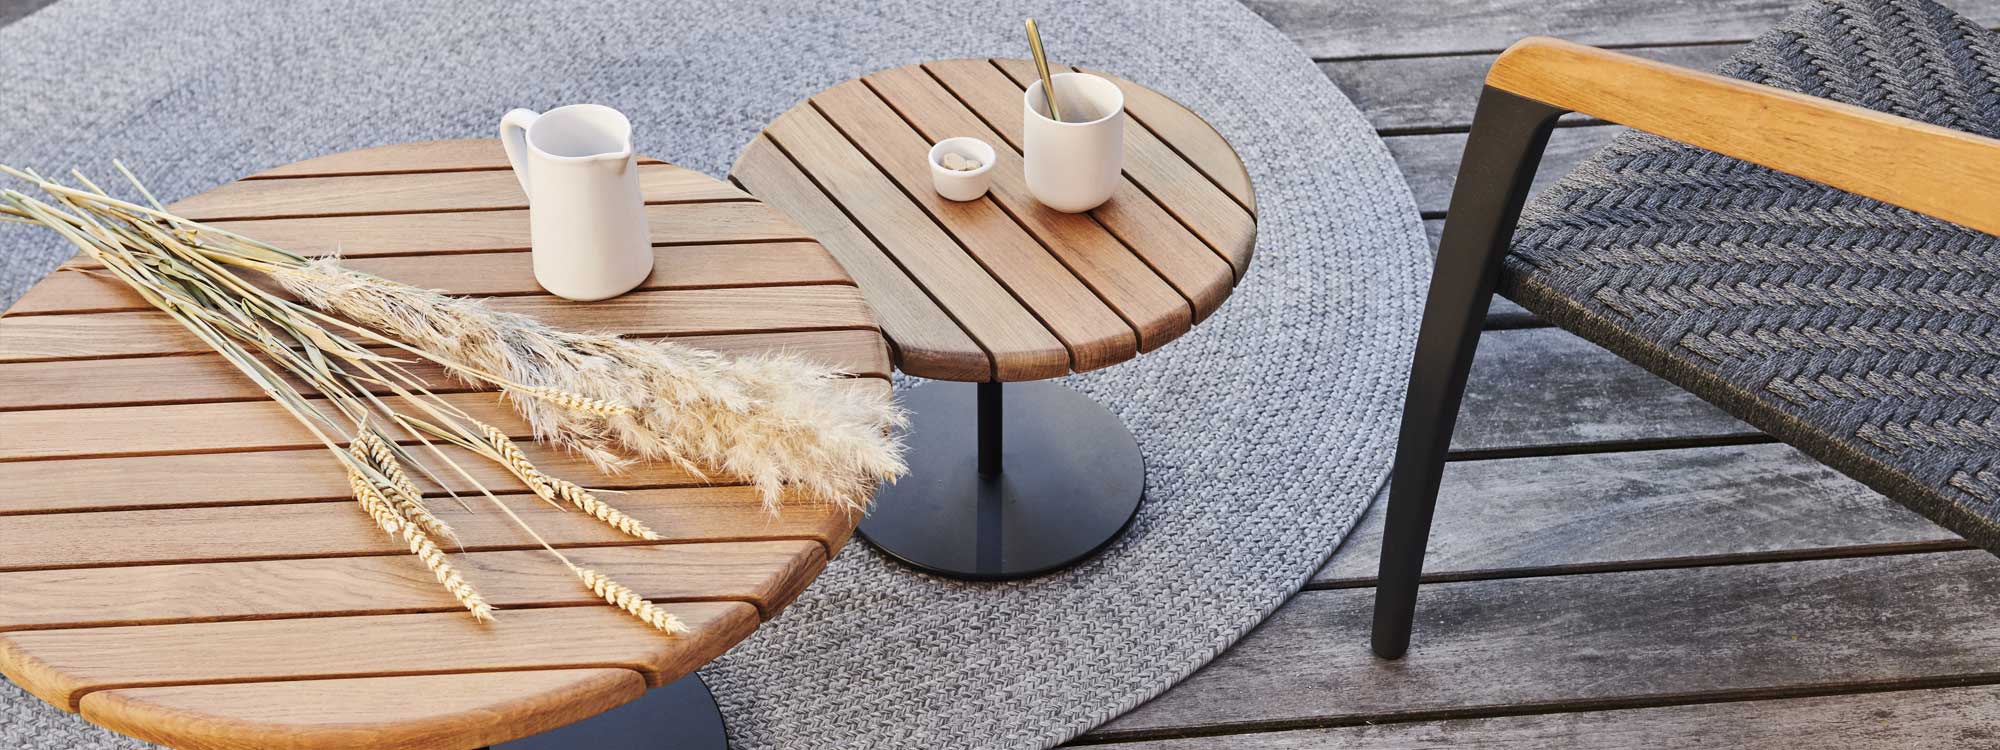 Image of Royal Botania Butler tables with planked teak tops and anthracite steel bases on circular outdoor rug